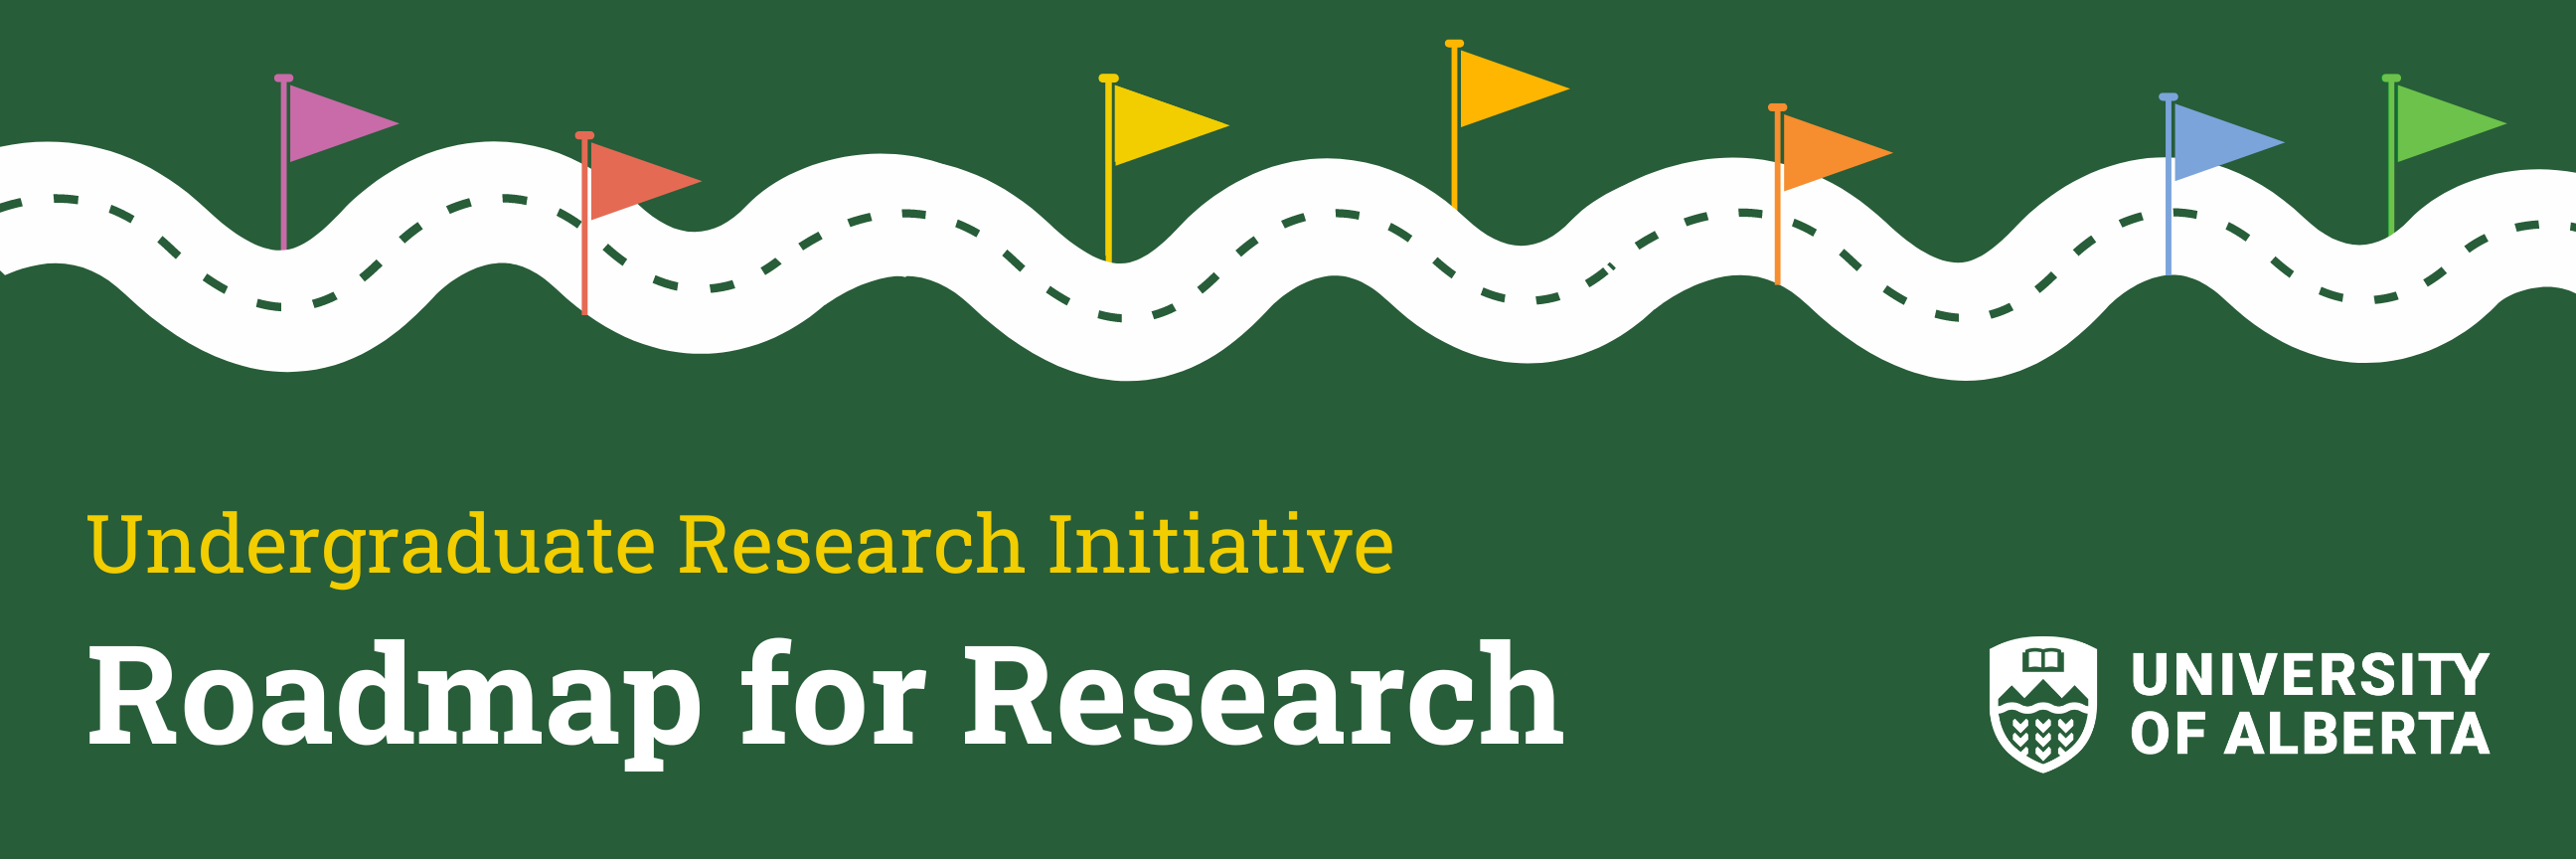 Green banner with graphic of road and flags title says Undergraduate Research Initiative Roadmap for Research